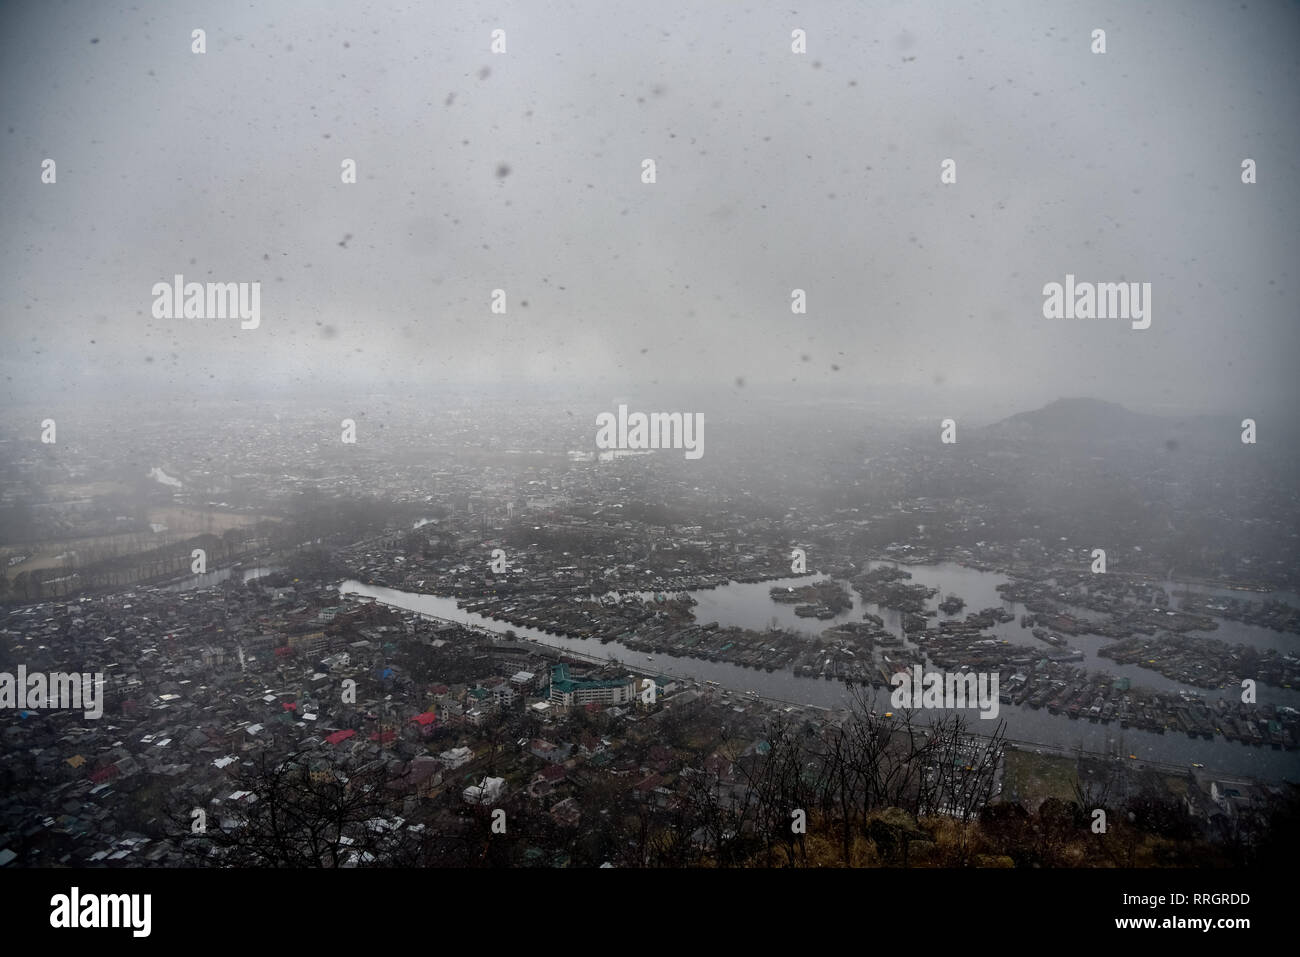 An aerial view of Srinagar city from Shankar Acharya hill amid fresh snowfall. Kashmir has been divided between India and Pakistan since their partition and independence from Britain in 1947. The disputed region is claimed in full by both sides, which have fought three wars over it. Stock Photo